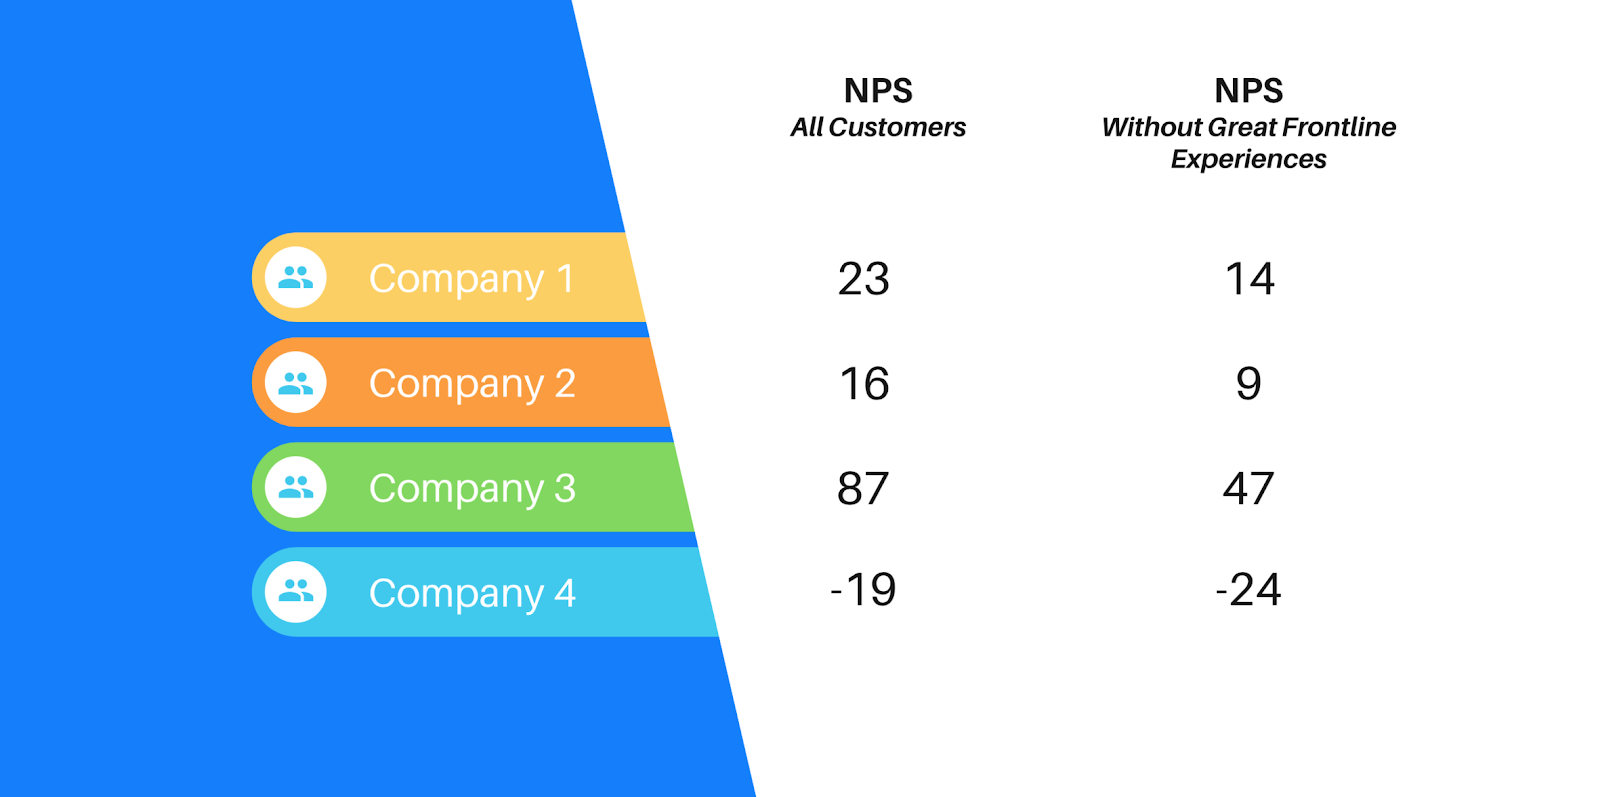 The impact of great frontline experience on NPS